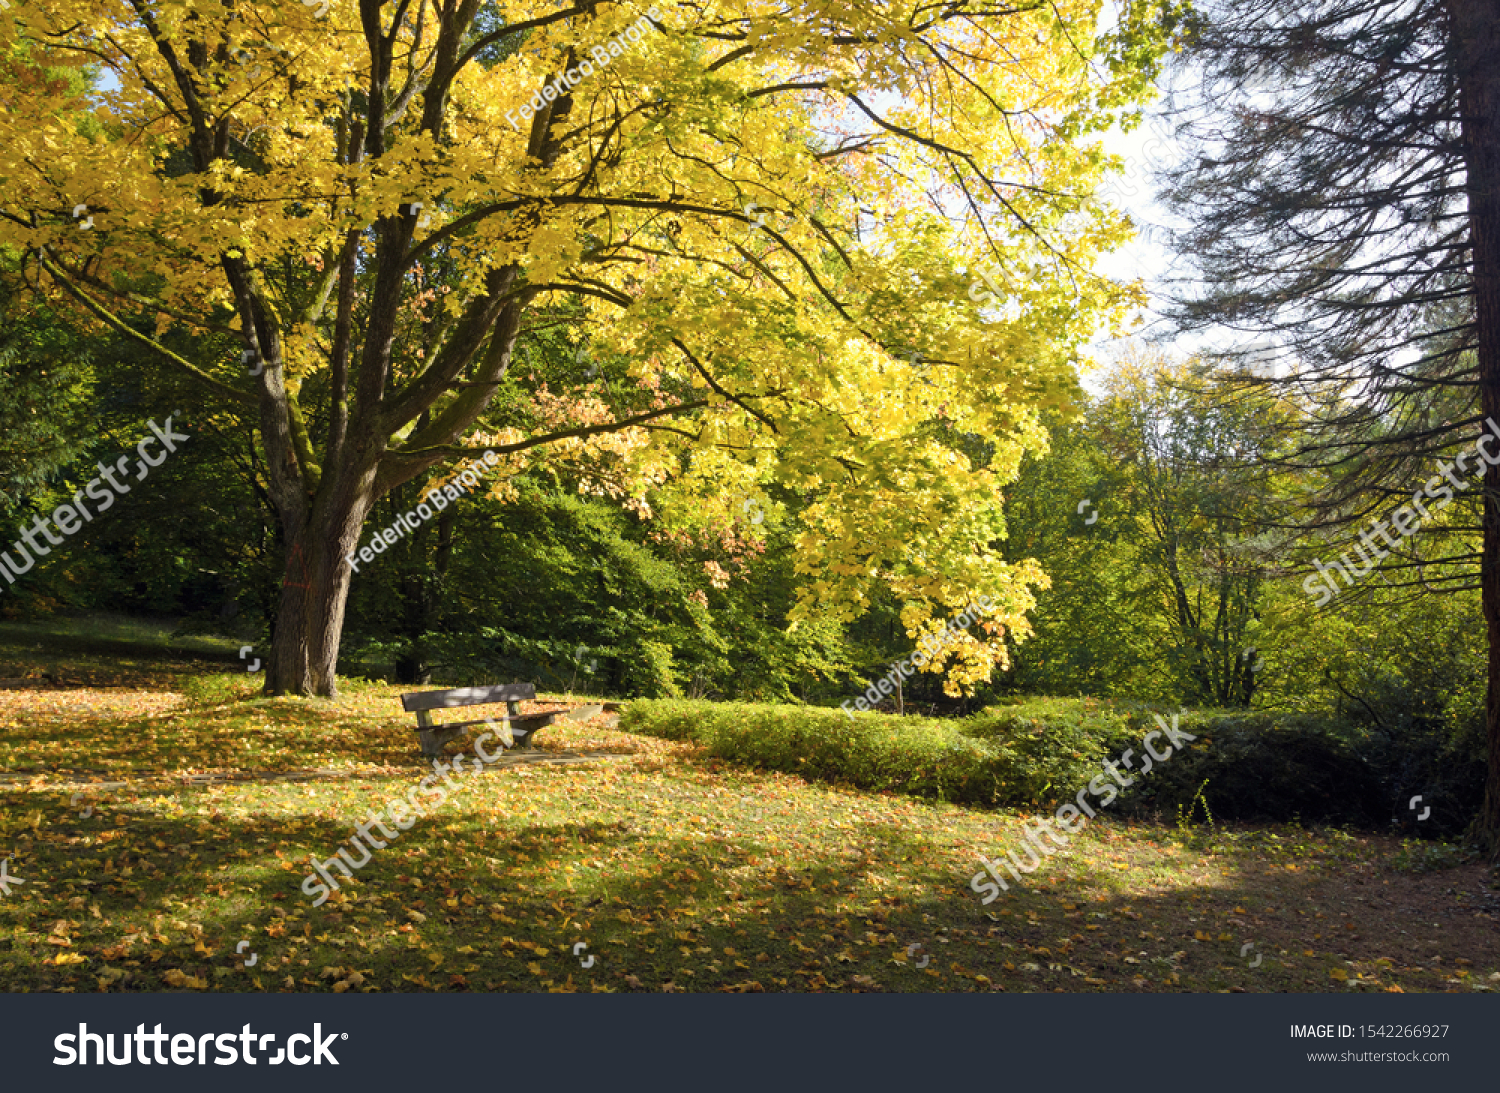 stock-photo-autumn-in-park-bench-with-ye